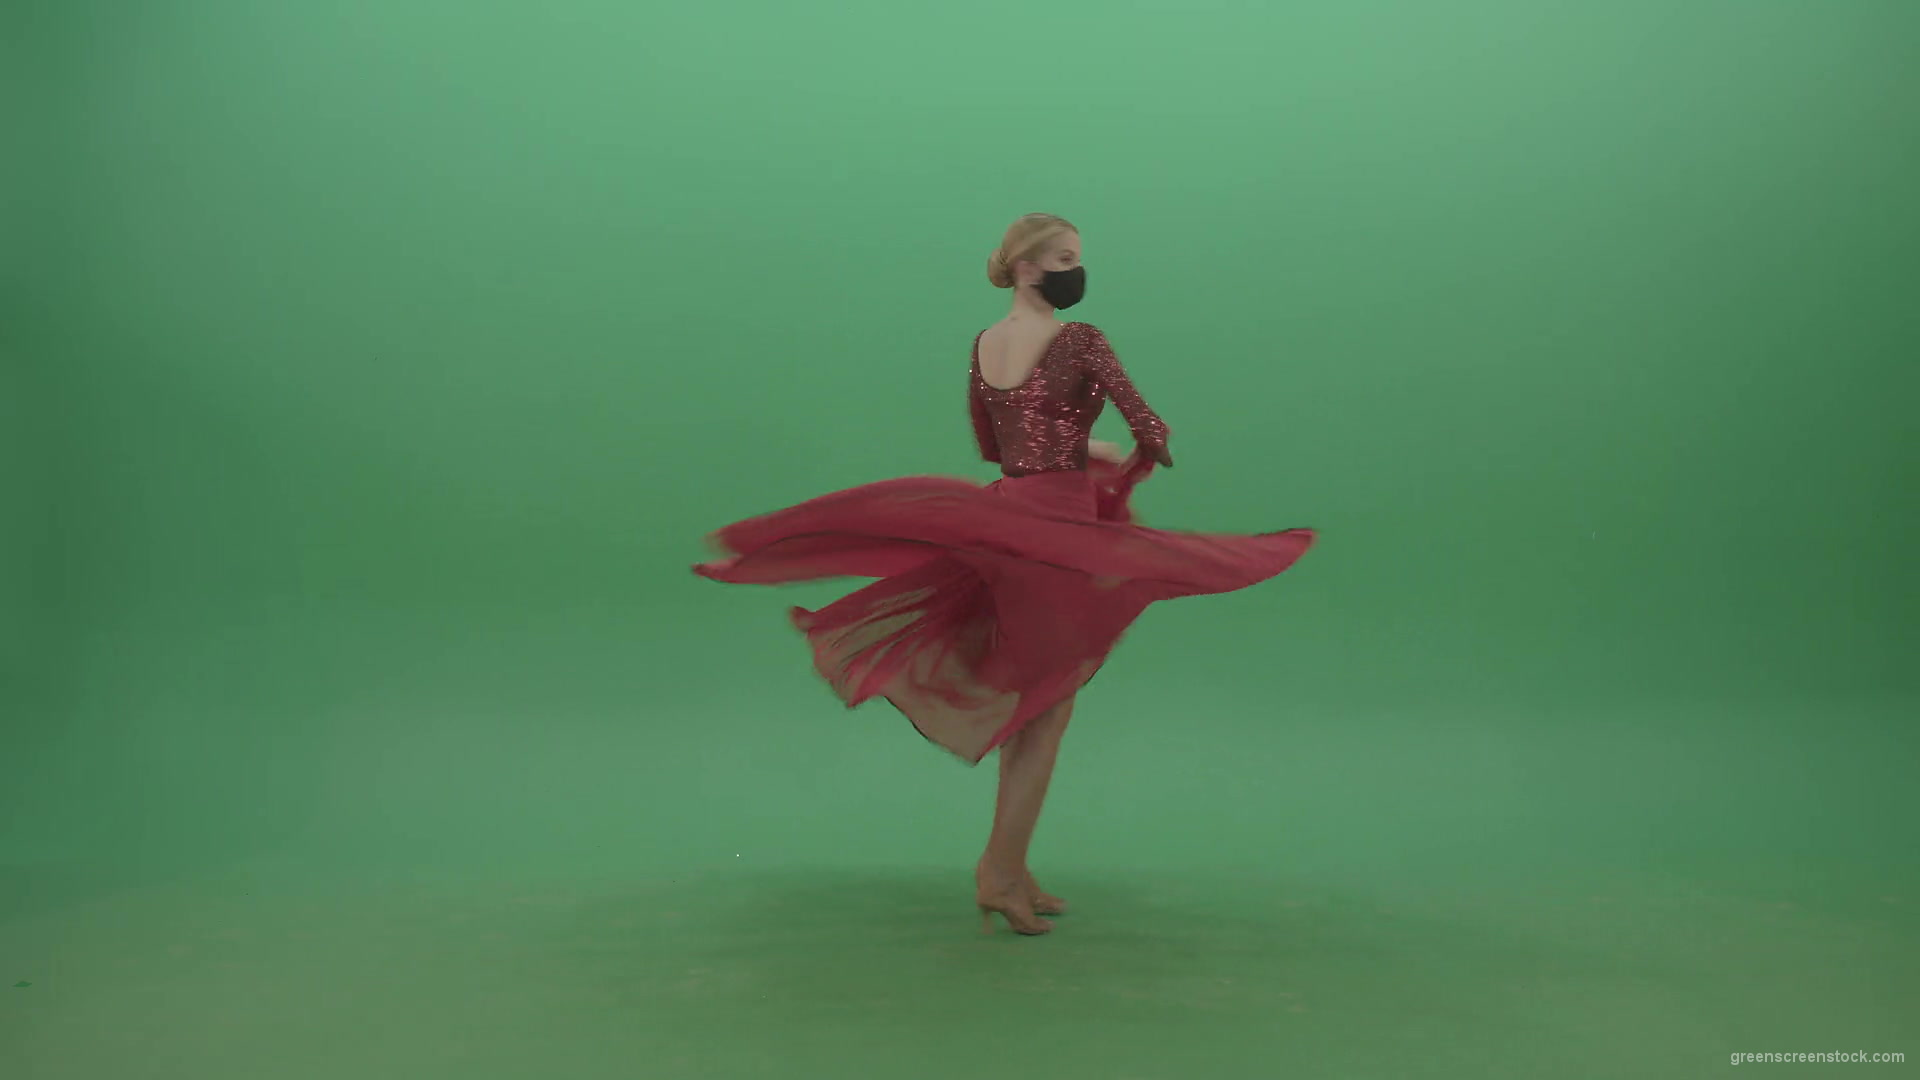 vj video background Blonde-Girl-in-red-Flamenco-Dress-makes-spinning-bowing-isolated-on-green-screen-4K-Video-Footage-1920_003